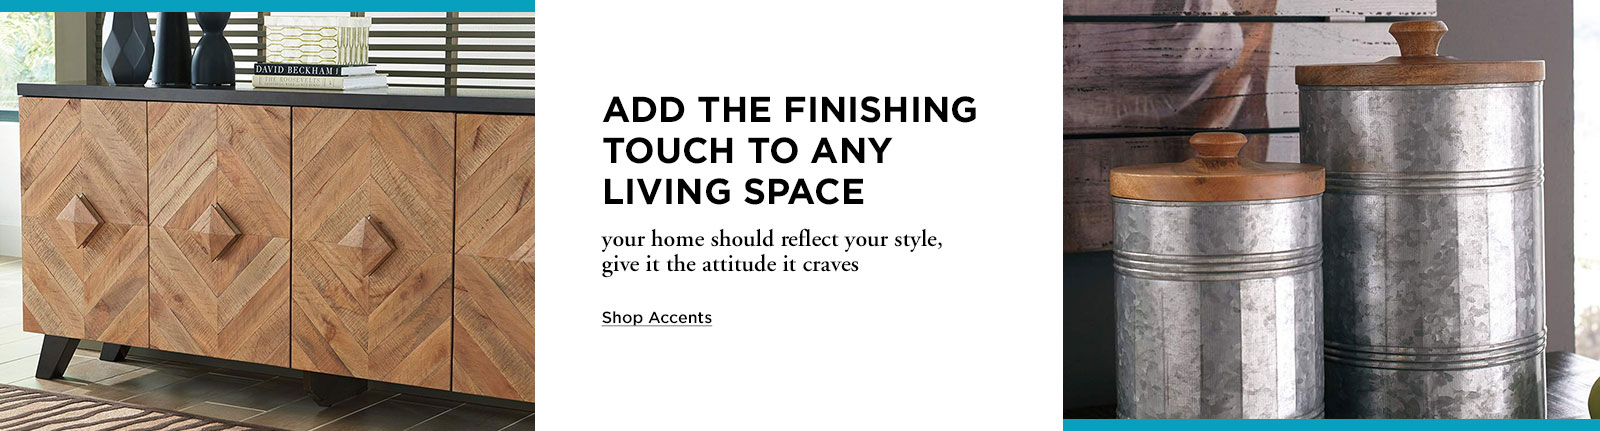 Add the Finishing Touch - Shop Accents